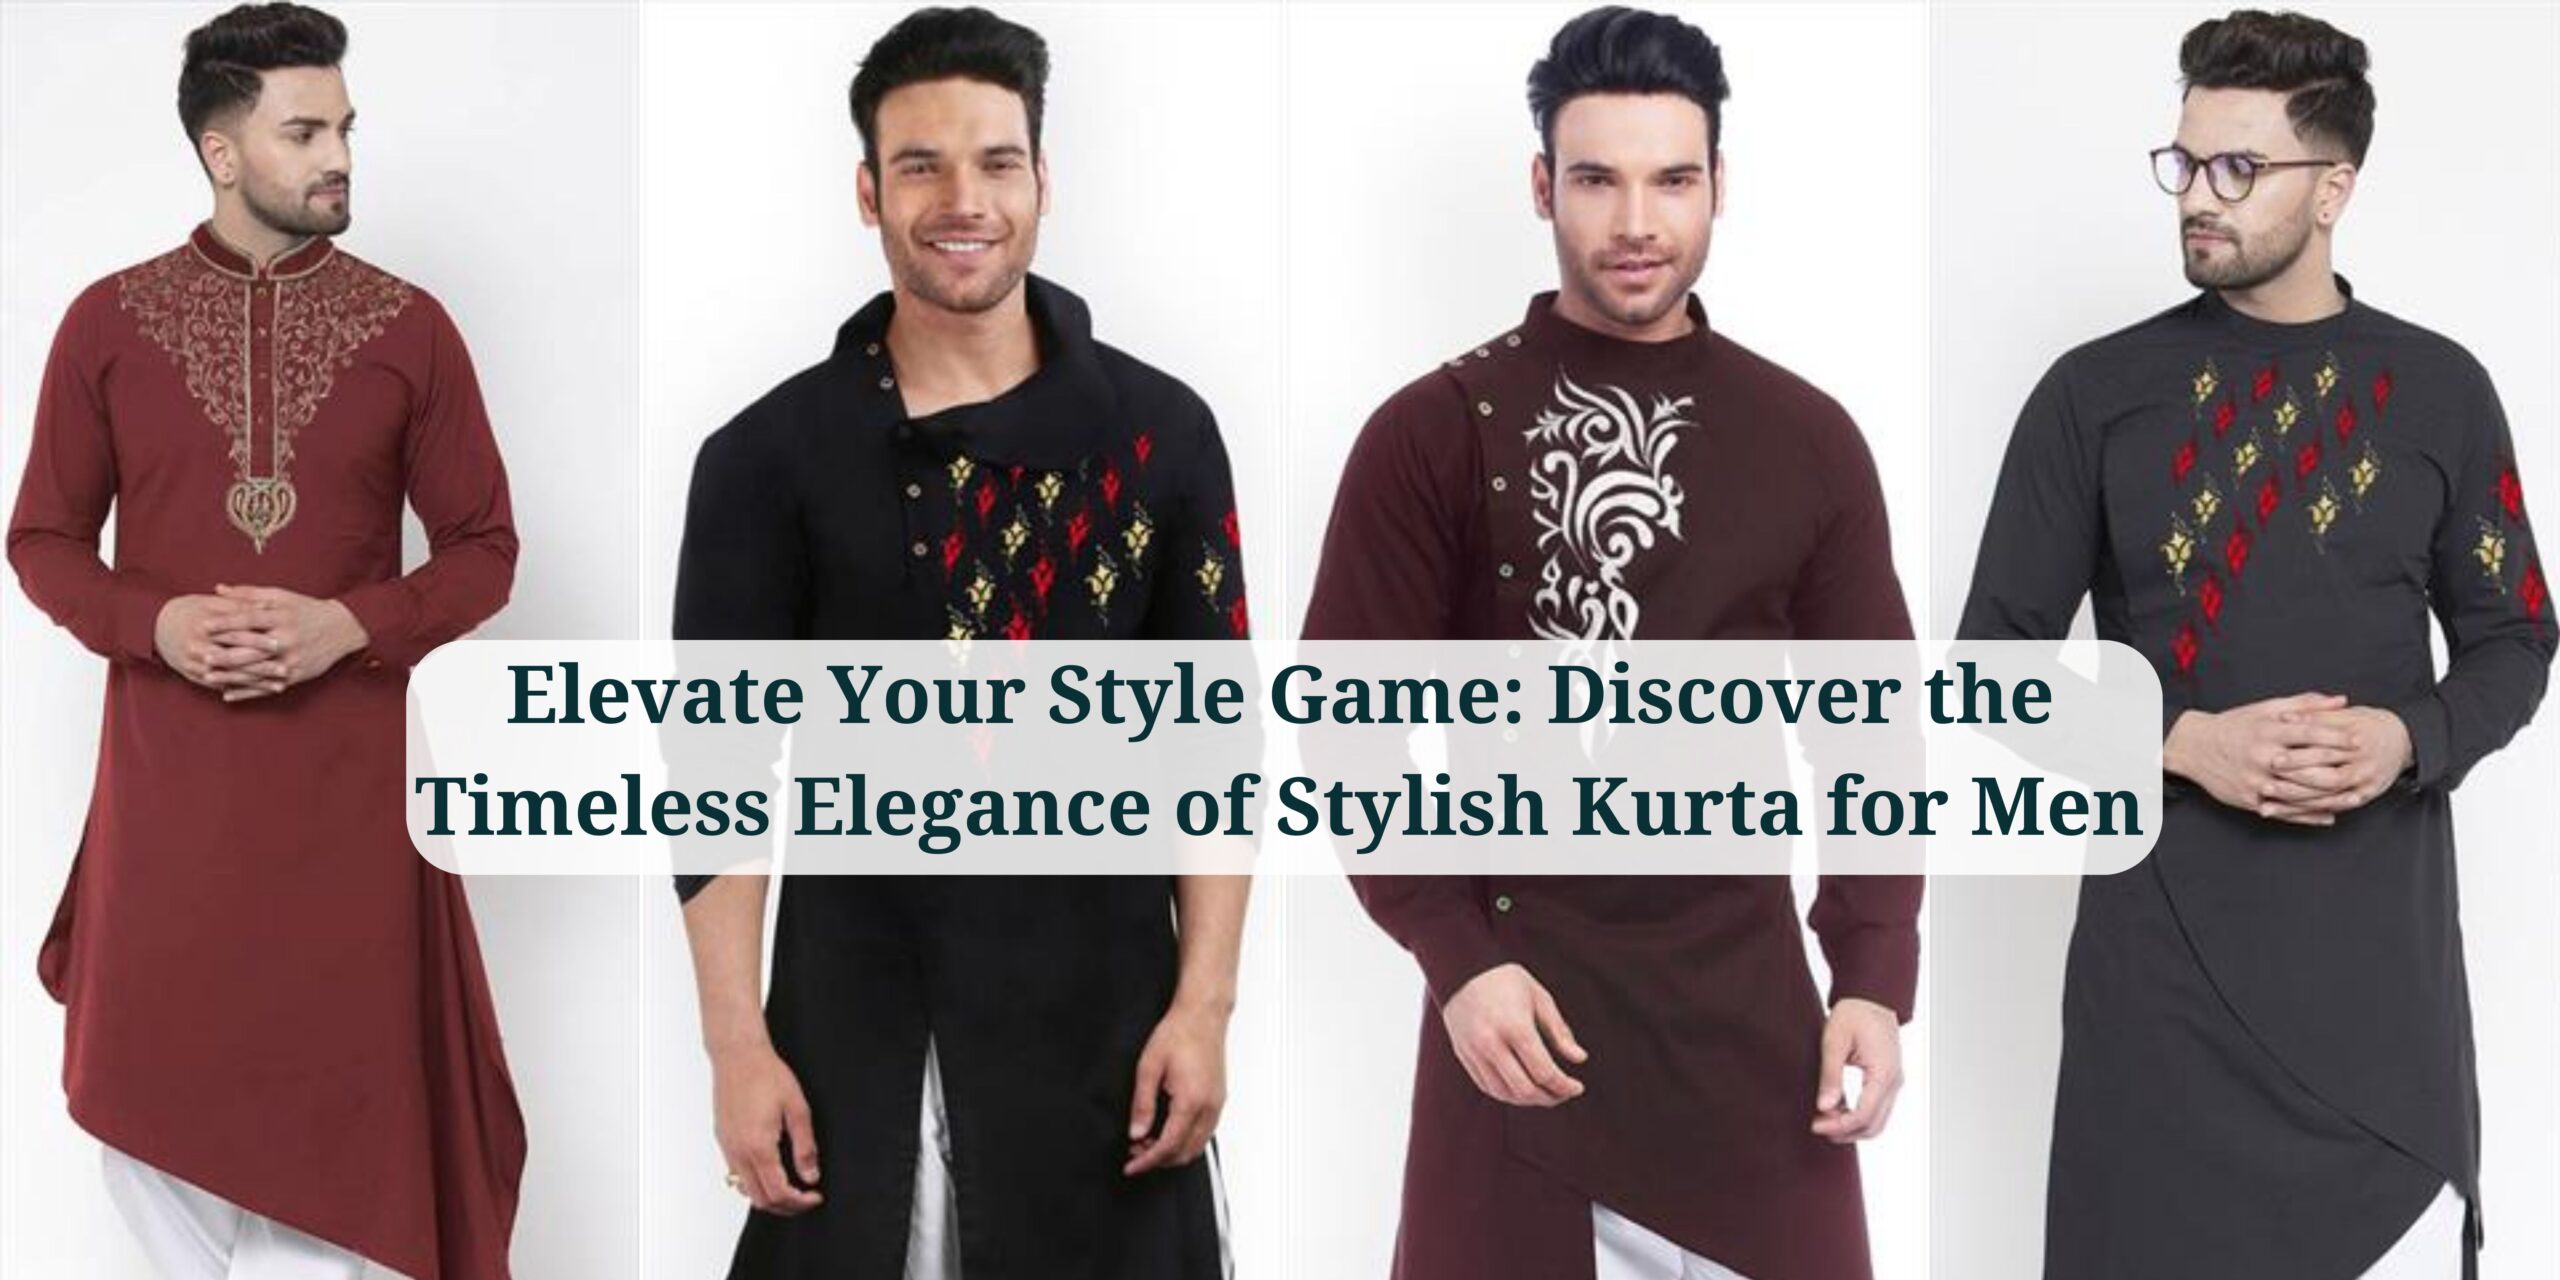 elevate-your-style-game-discover-the-timeless-elegance-of-stylish-kurta-for-men